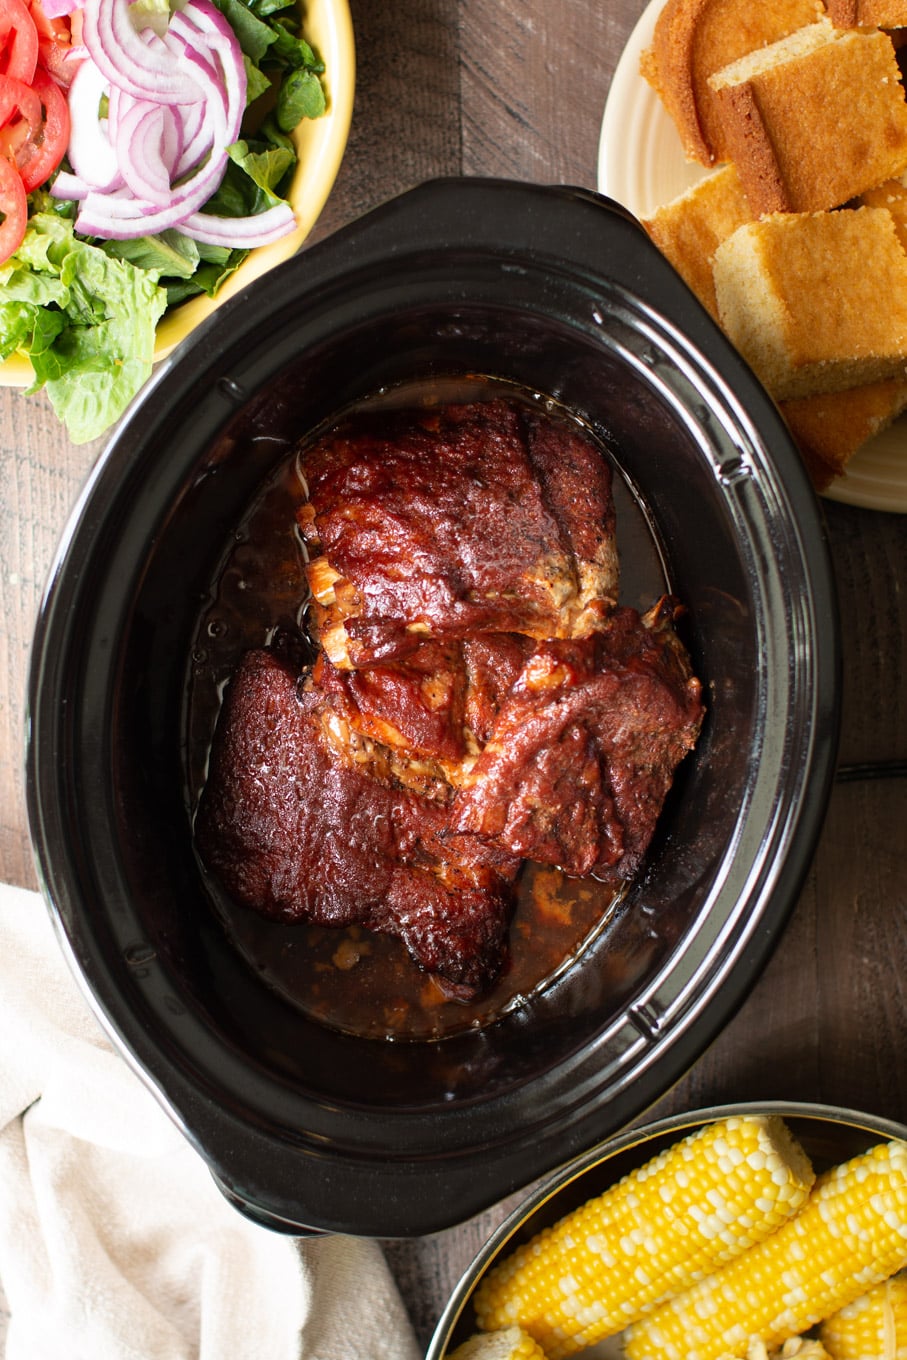 4 sections of barbecue ribs in the slow cooker with corn, salad and cornbread on the side.